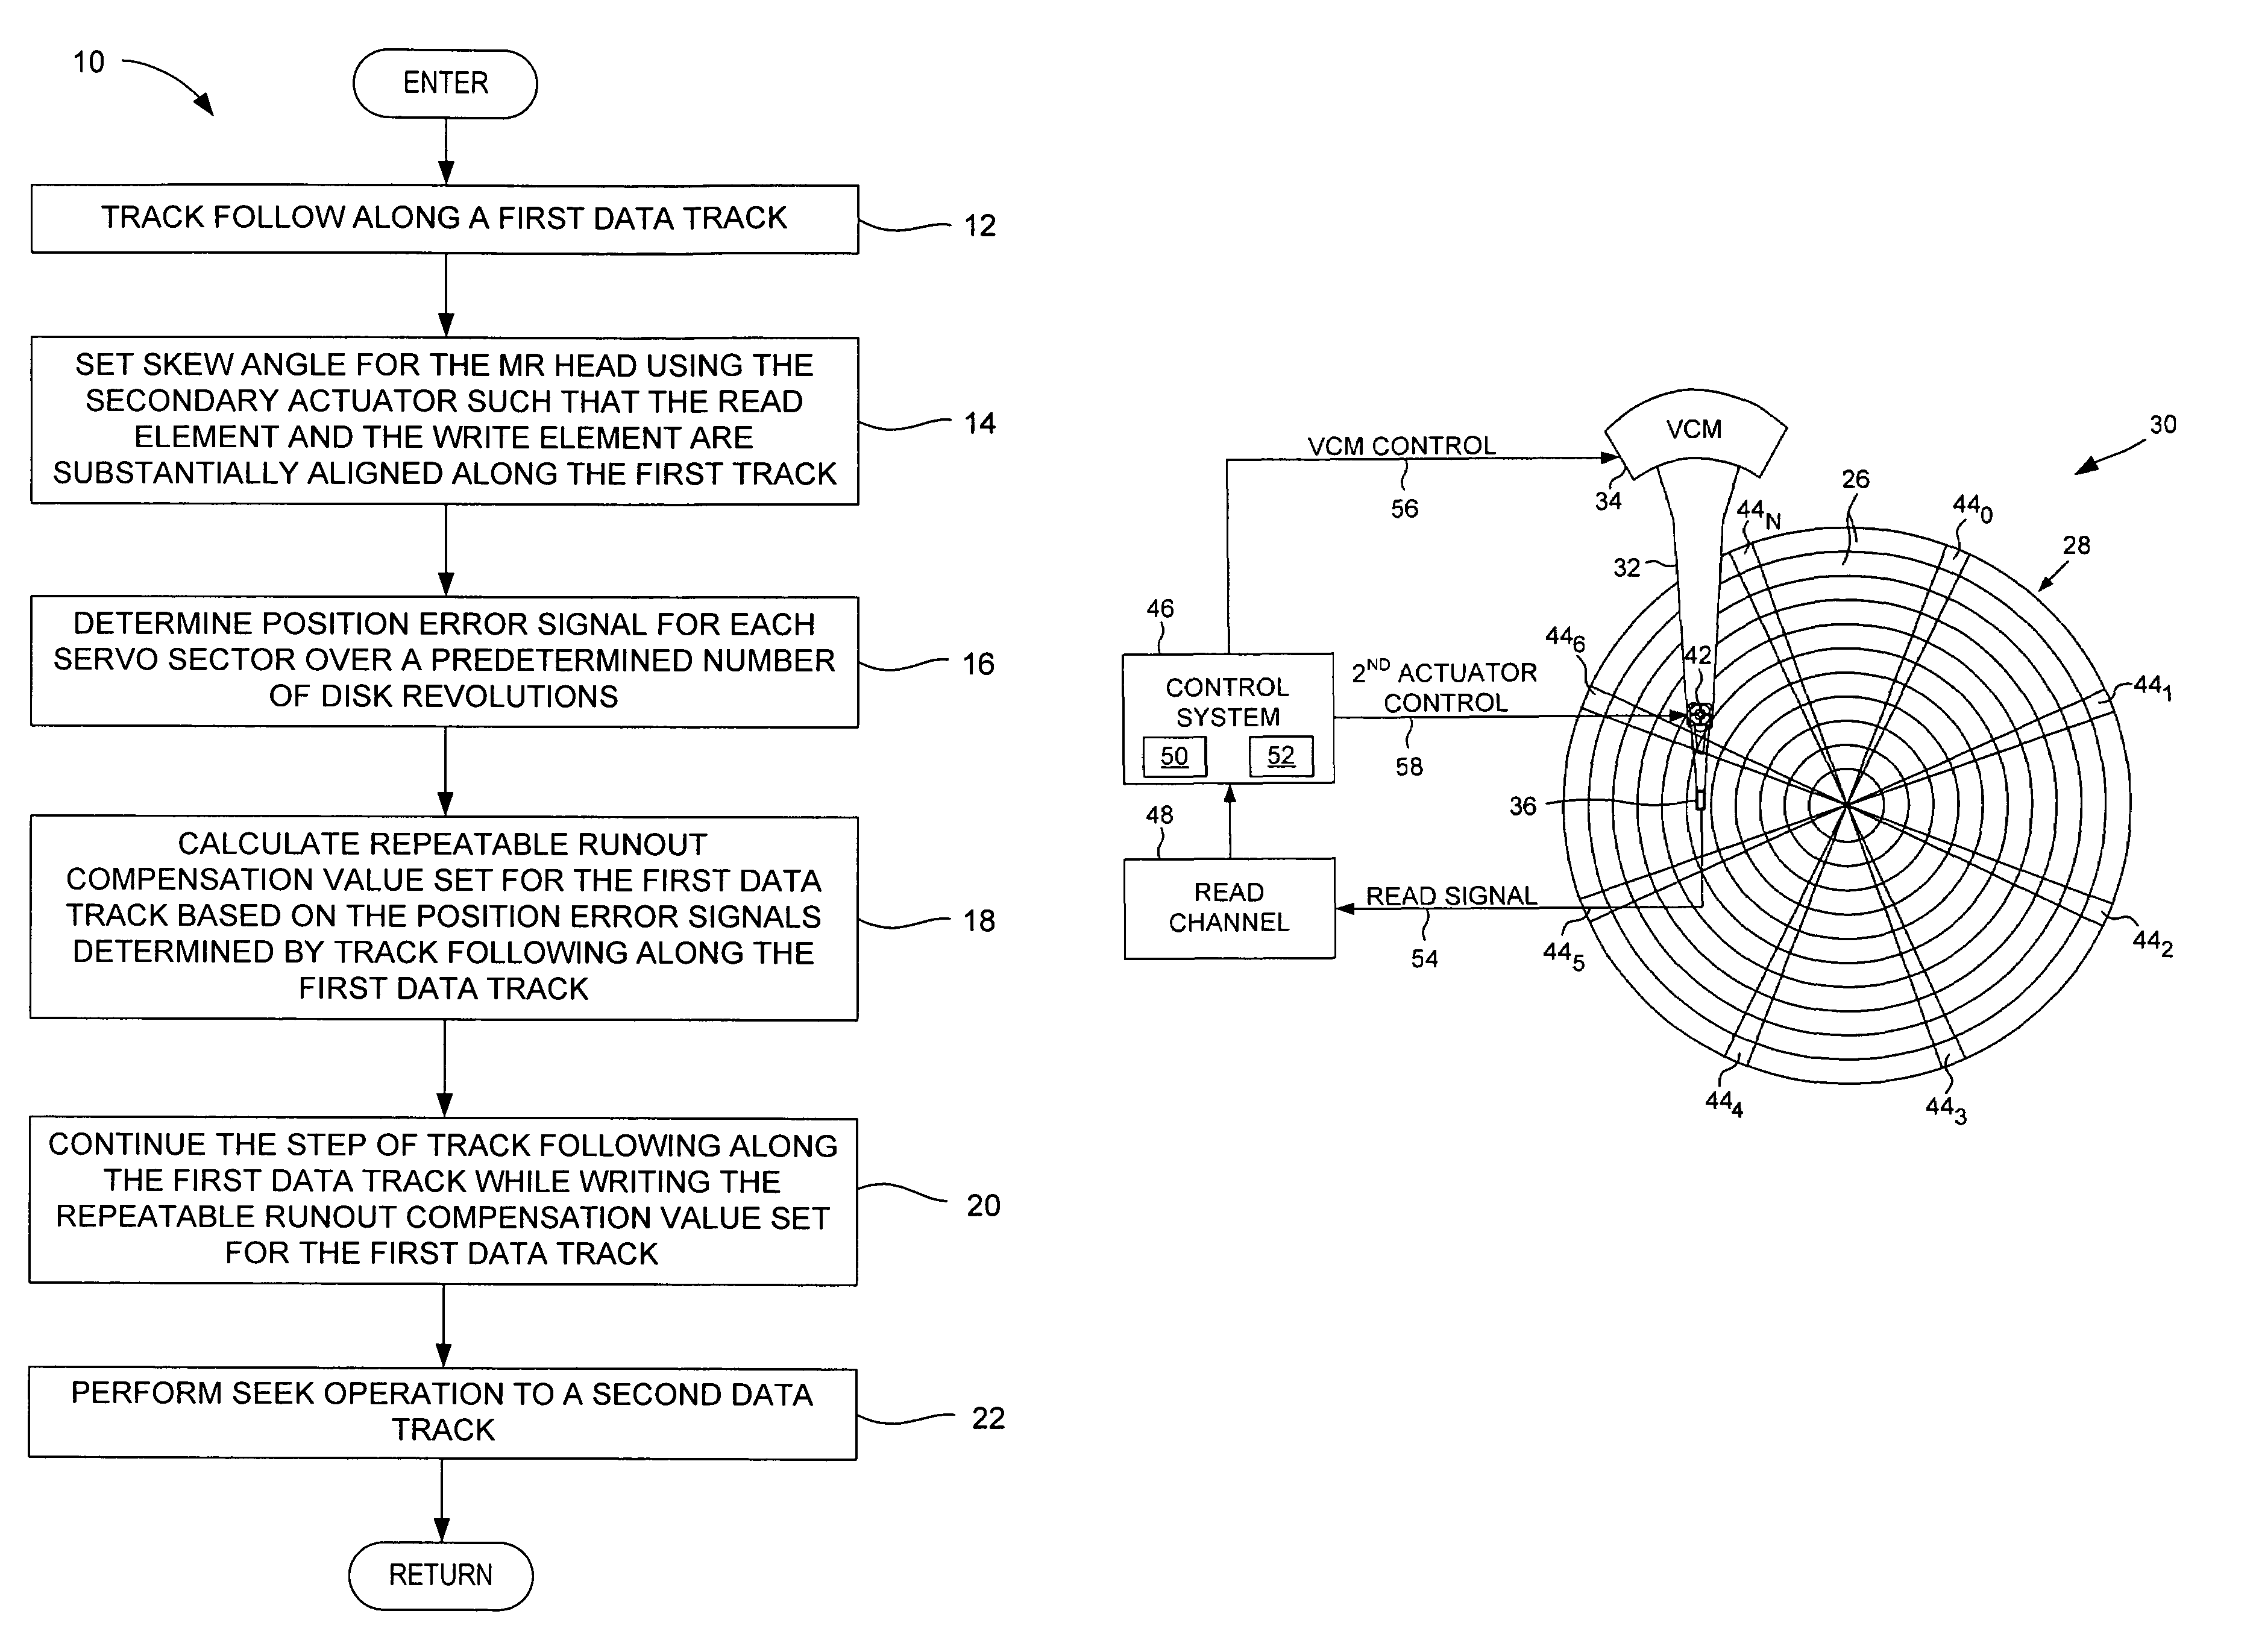 Magnetic disk drive and method for efficiently determining and storing RRO compensation values using a secondary micro-actuator